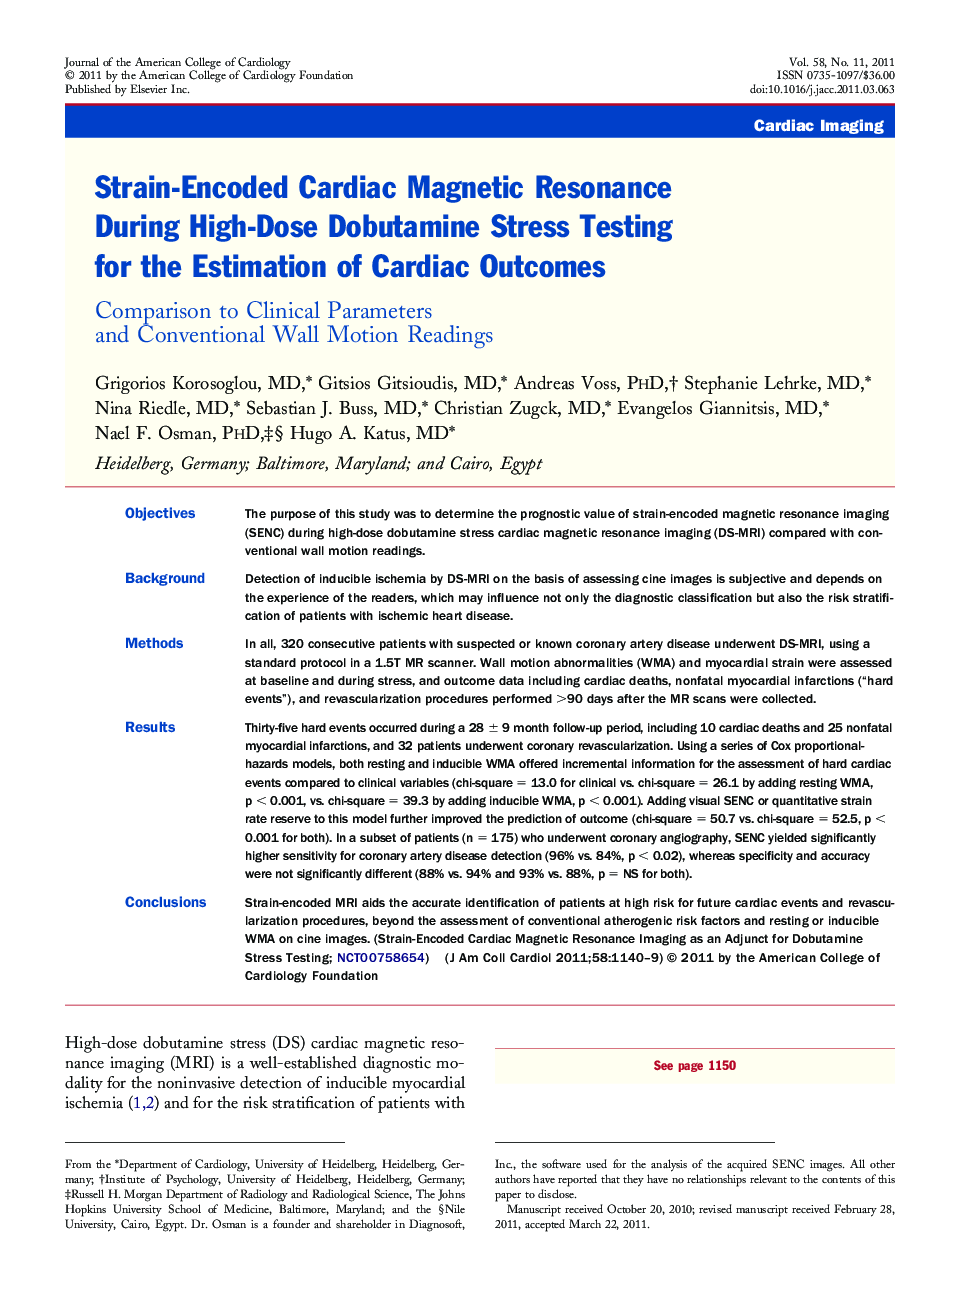 Strain-Encoded Cardiac Magnetic Resonance During High-Dose Dobutamine Stress Testing for the Estimation of Cardiac Outcomes : Comparison to Clinical Parameters and Conventional Wall Motion Readings